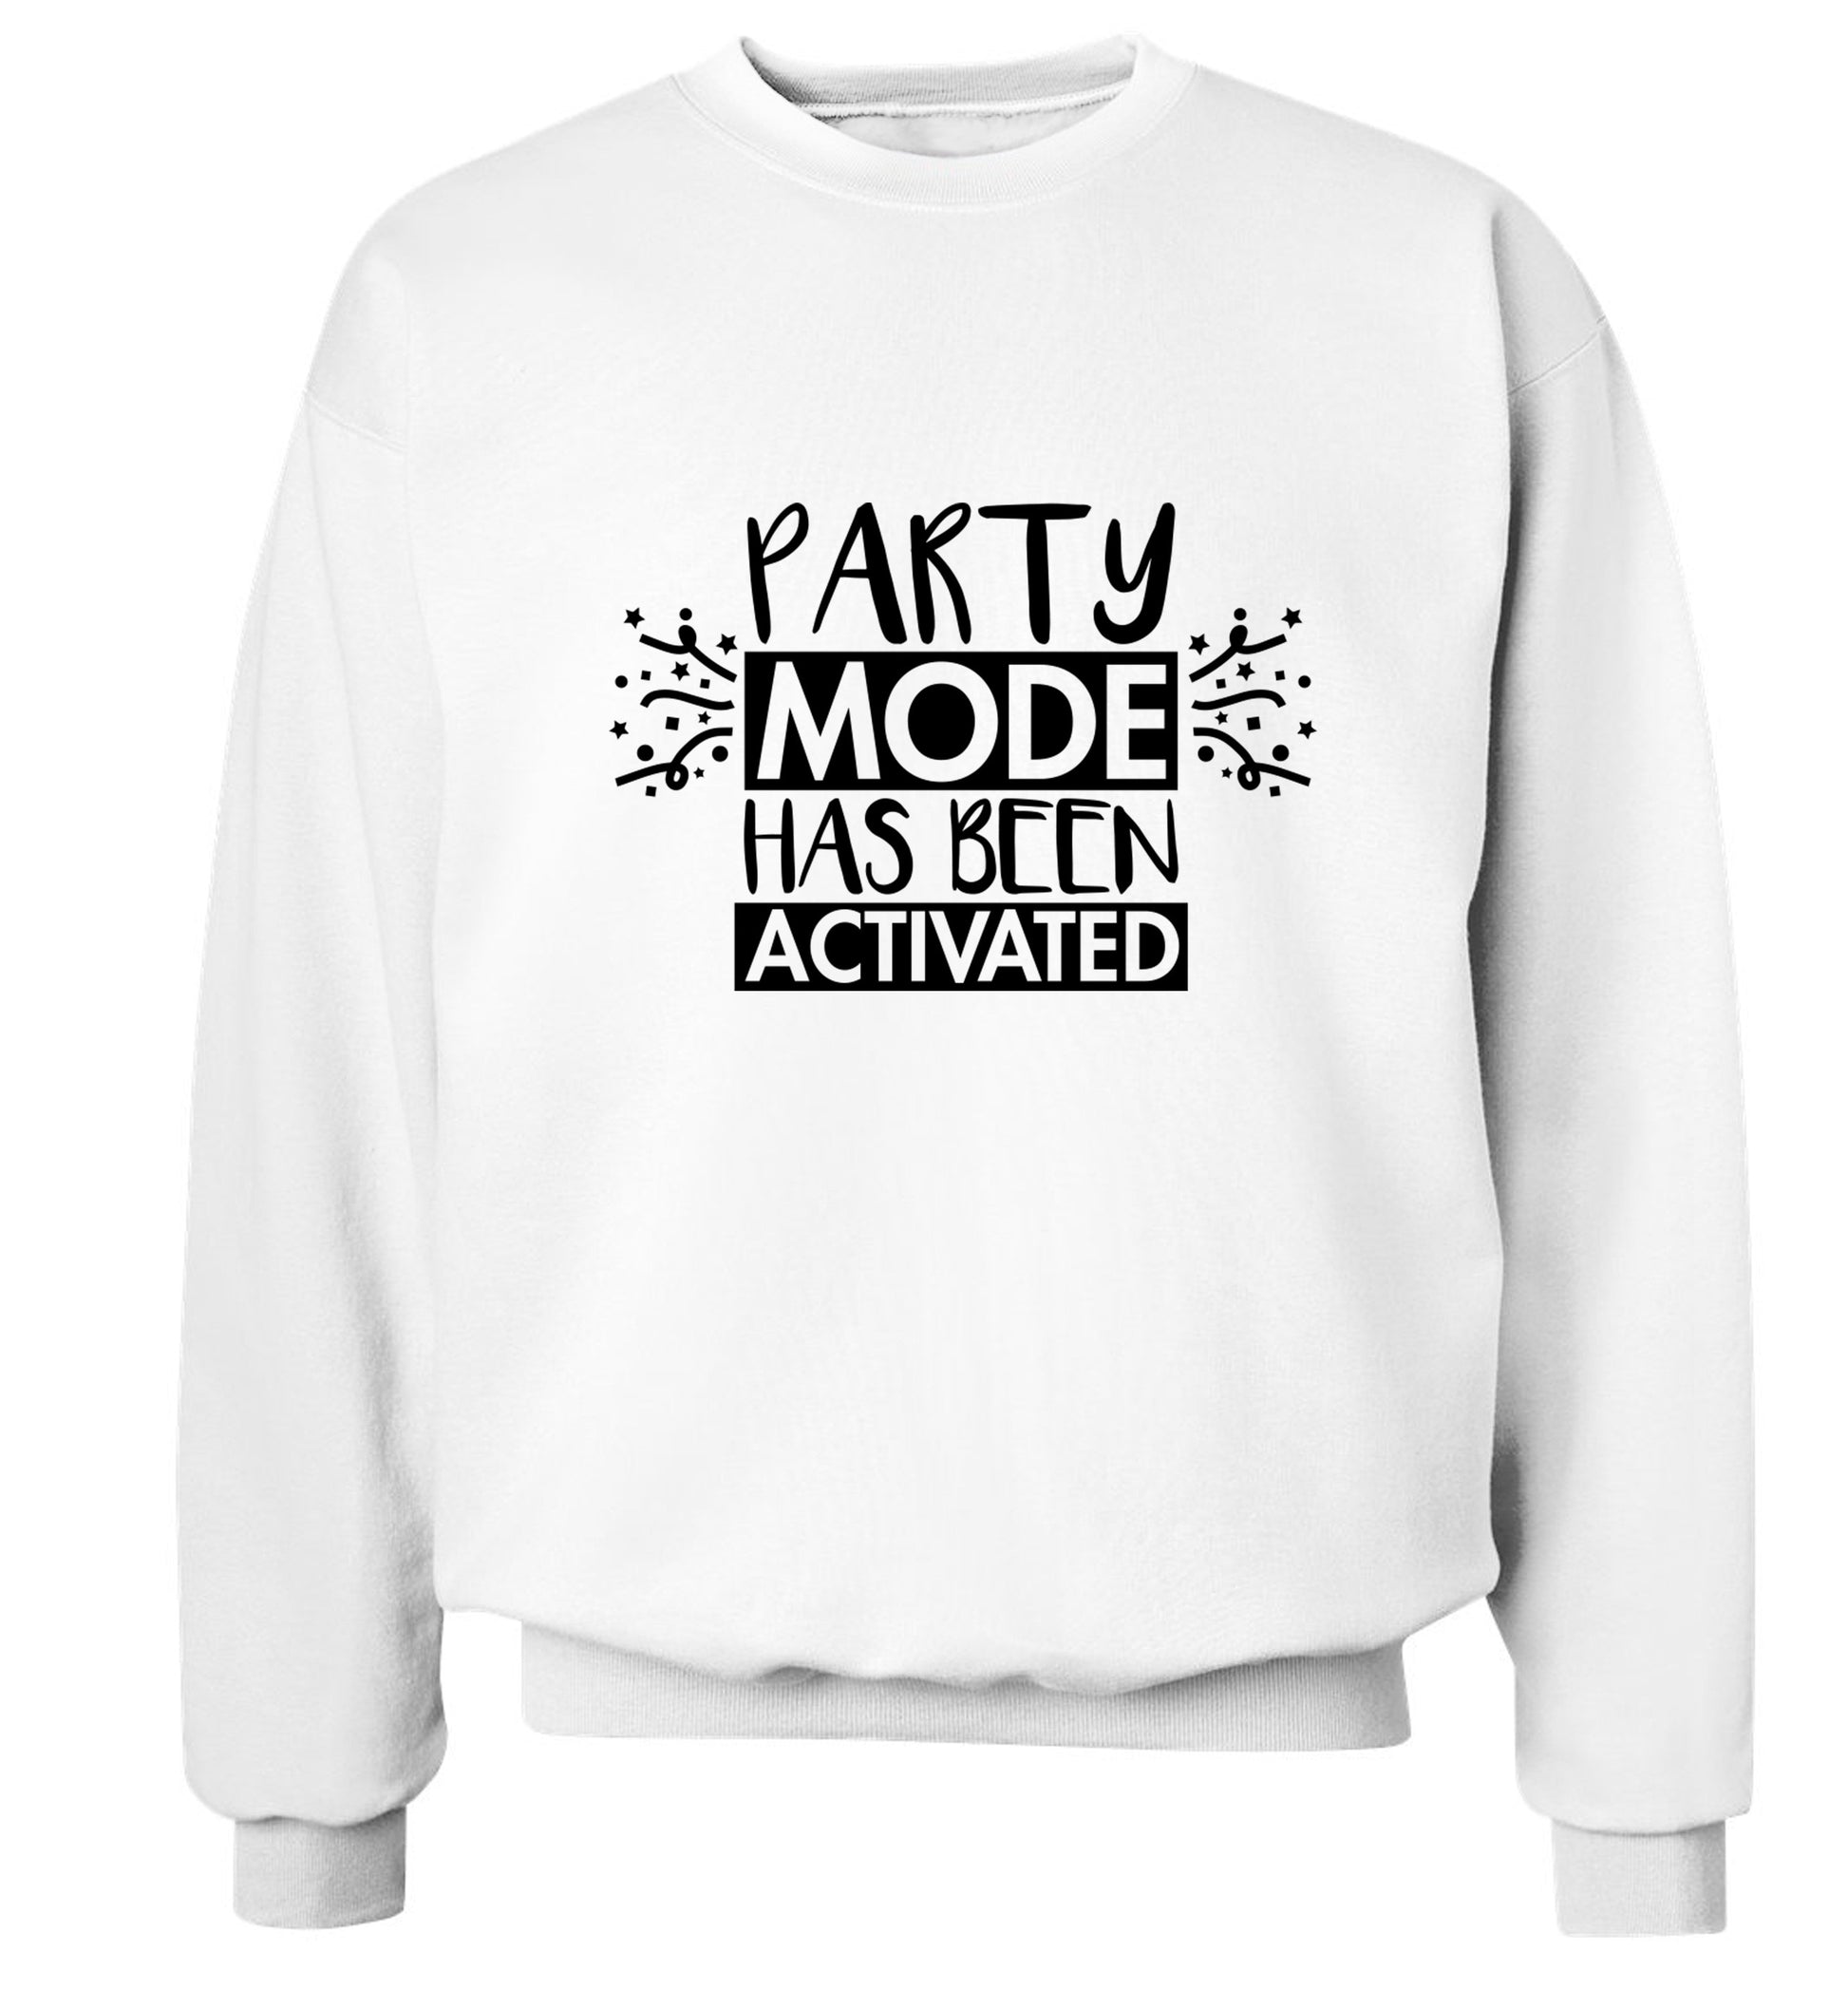 Please do not disturb party mode has been activated Adult's unisex white Sweater 2XL